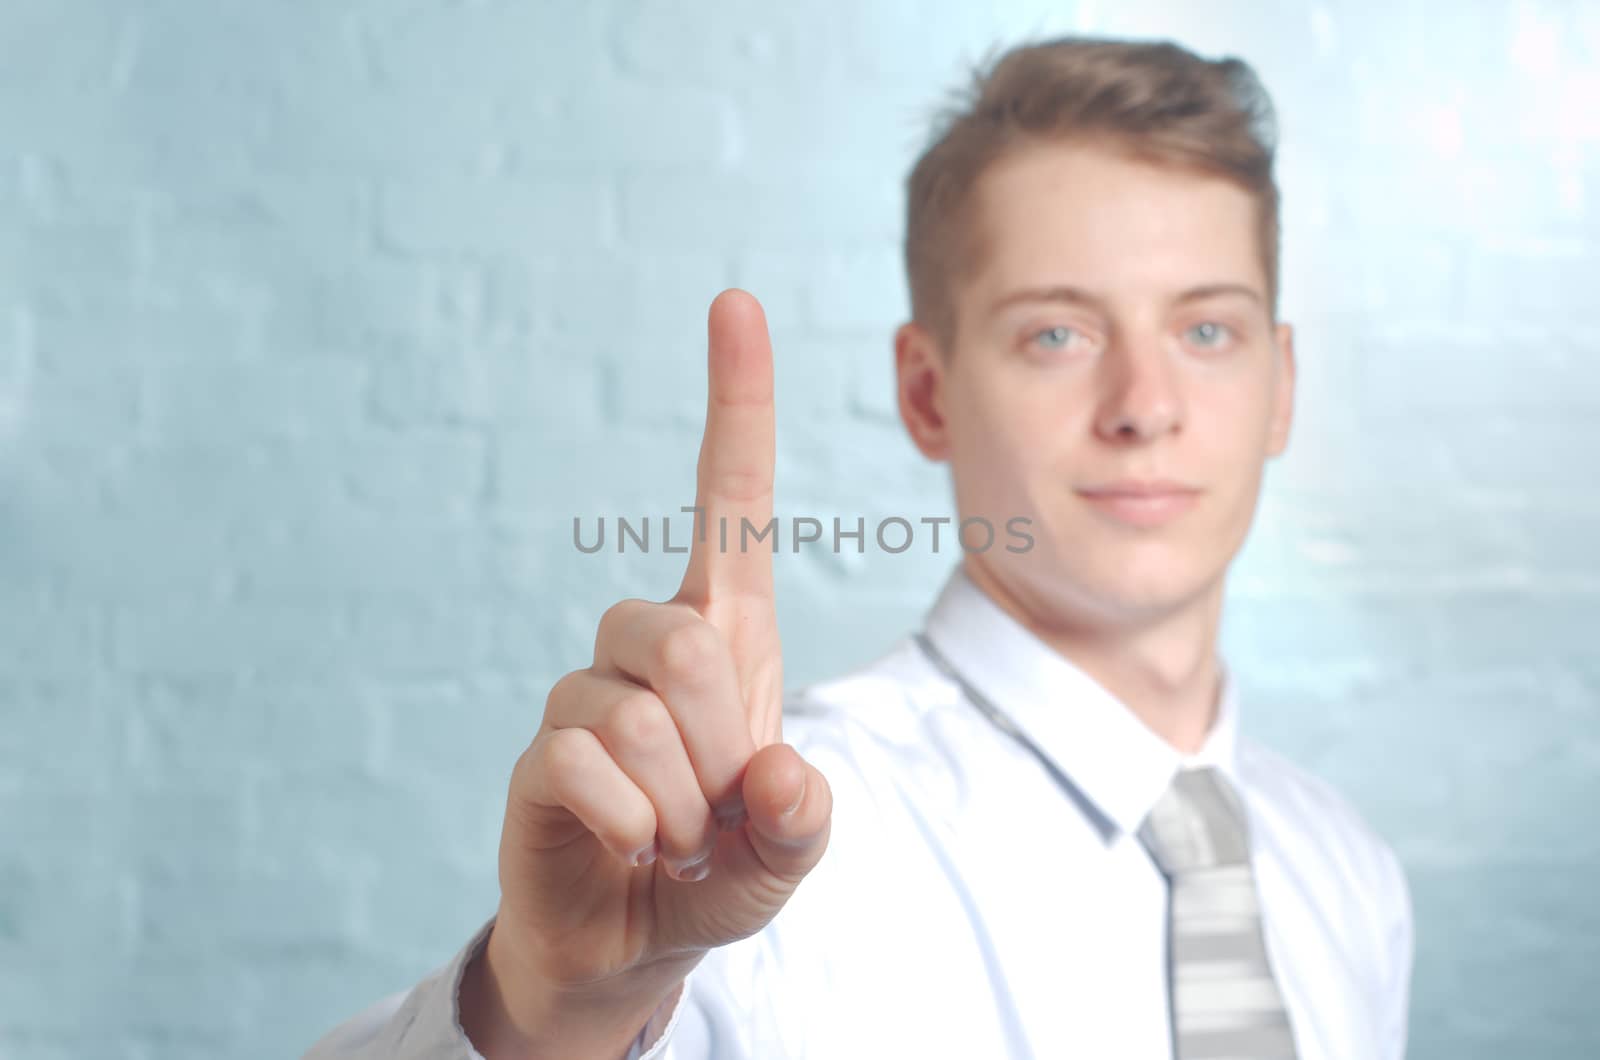 Businessman pushing imaginary button one finger - insert own concept